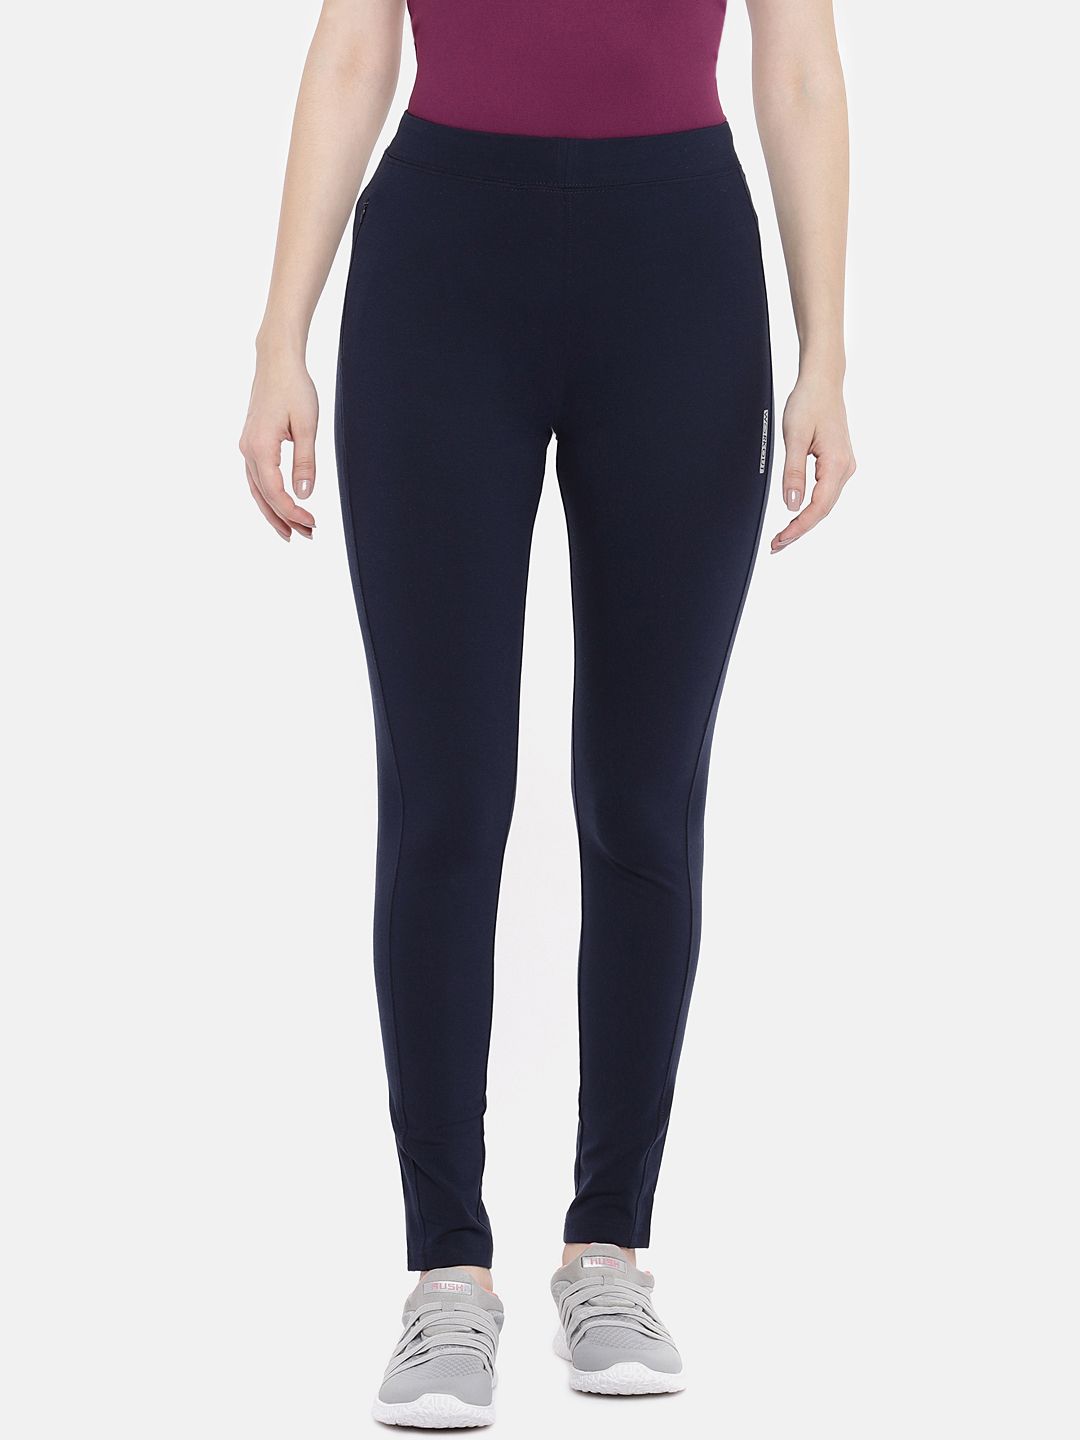 Sweet Dreams Women Navy Blue Solid Slim Fit Tights Price in India